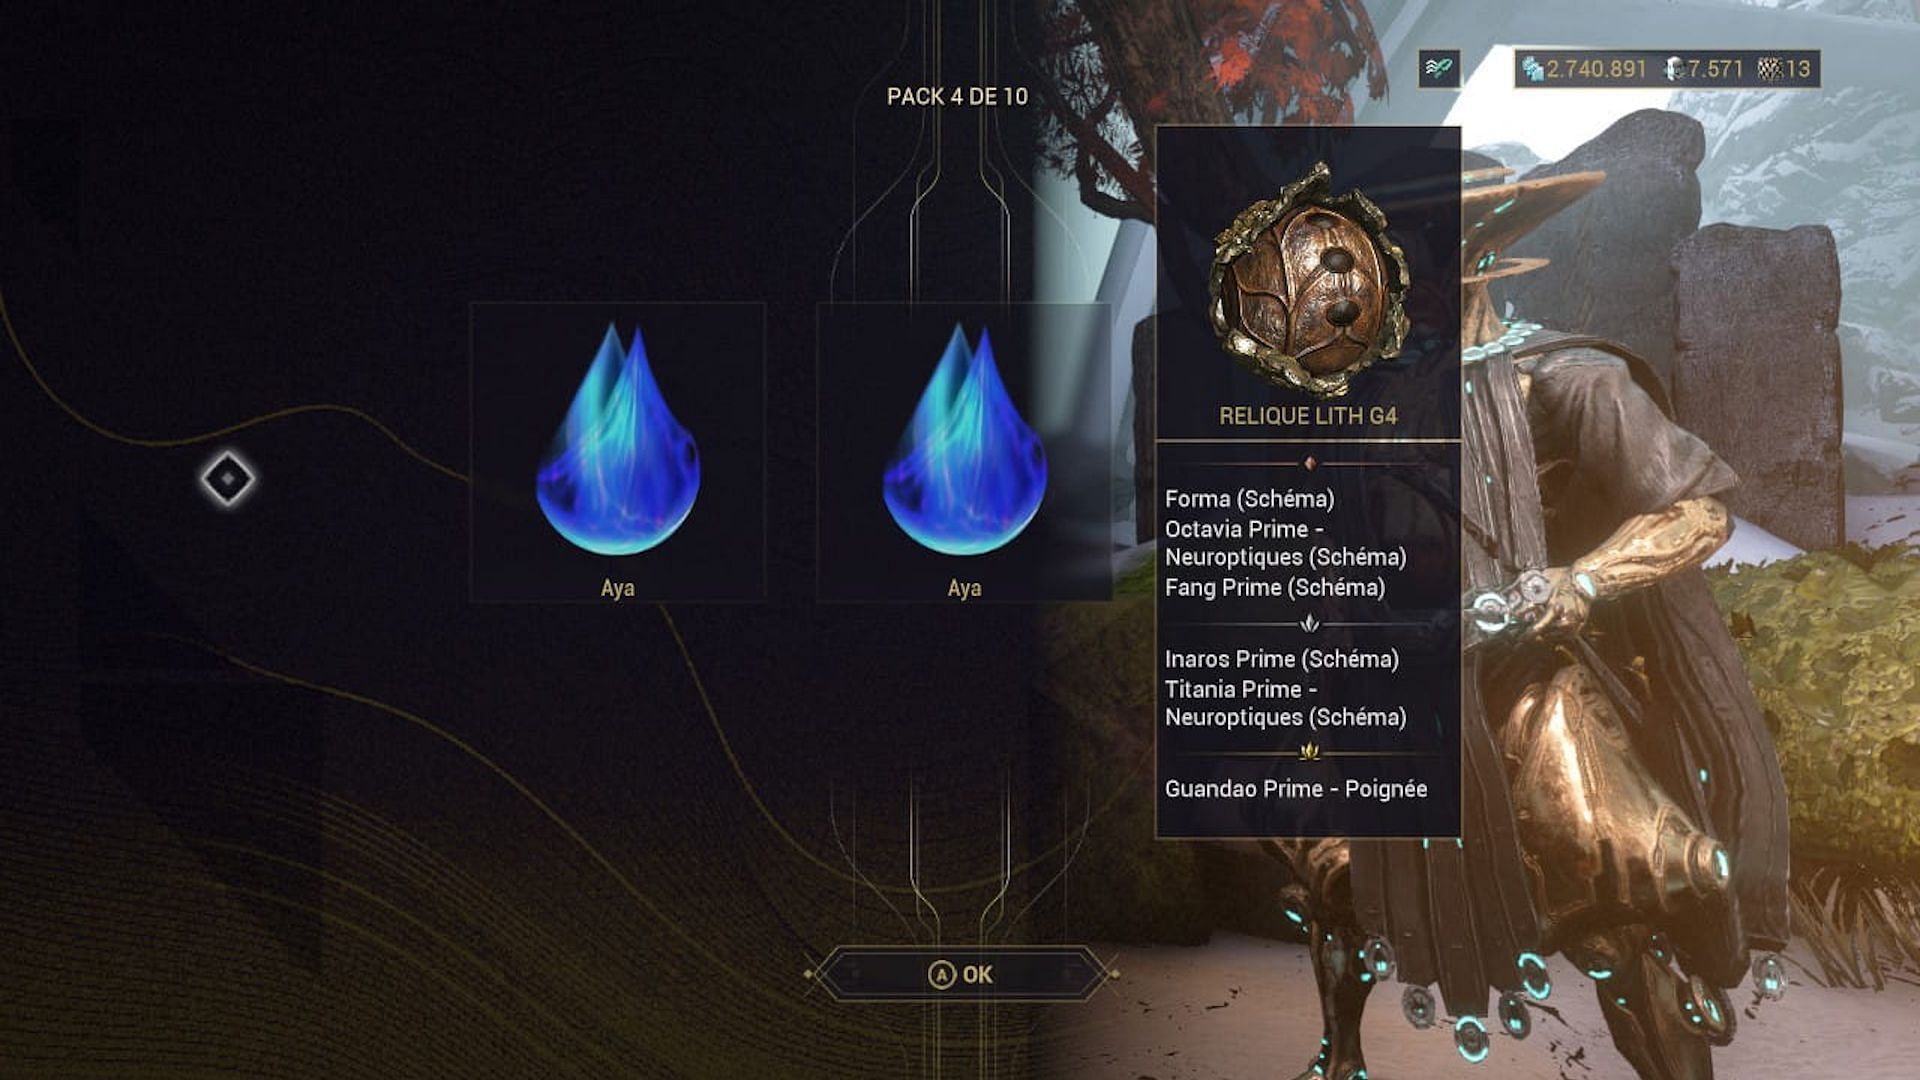 Aya yield from Relic Pack in Warframe (Image via Digital Extremes)